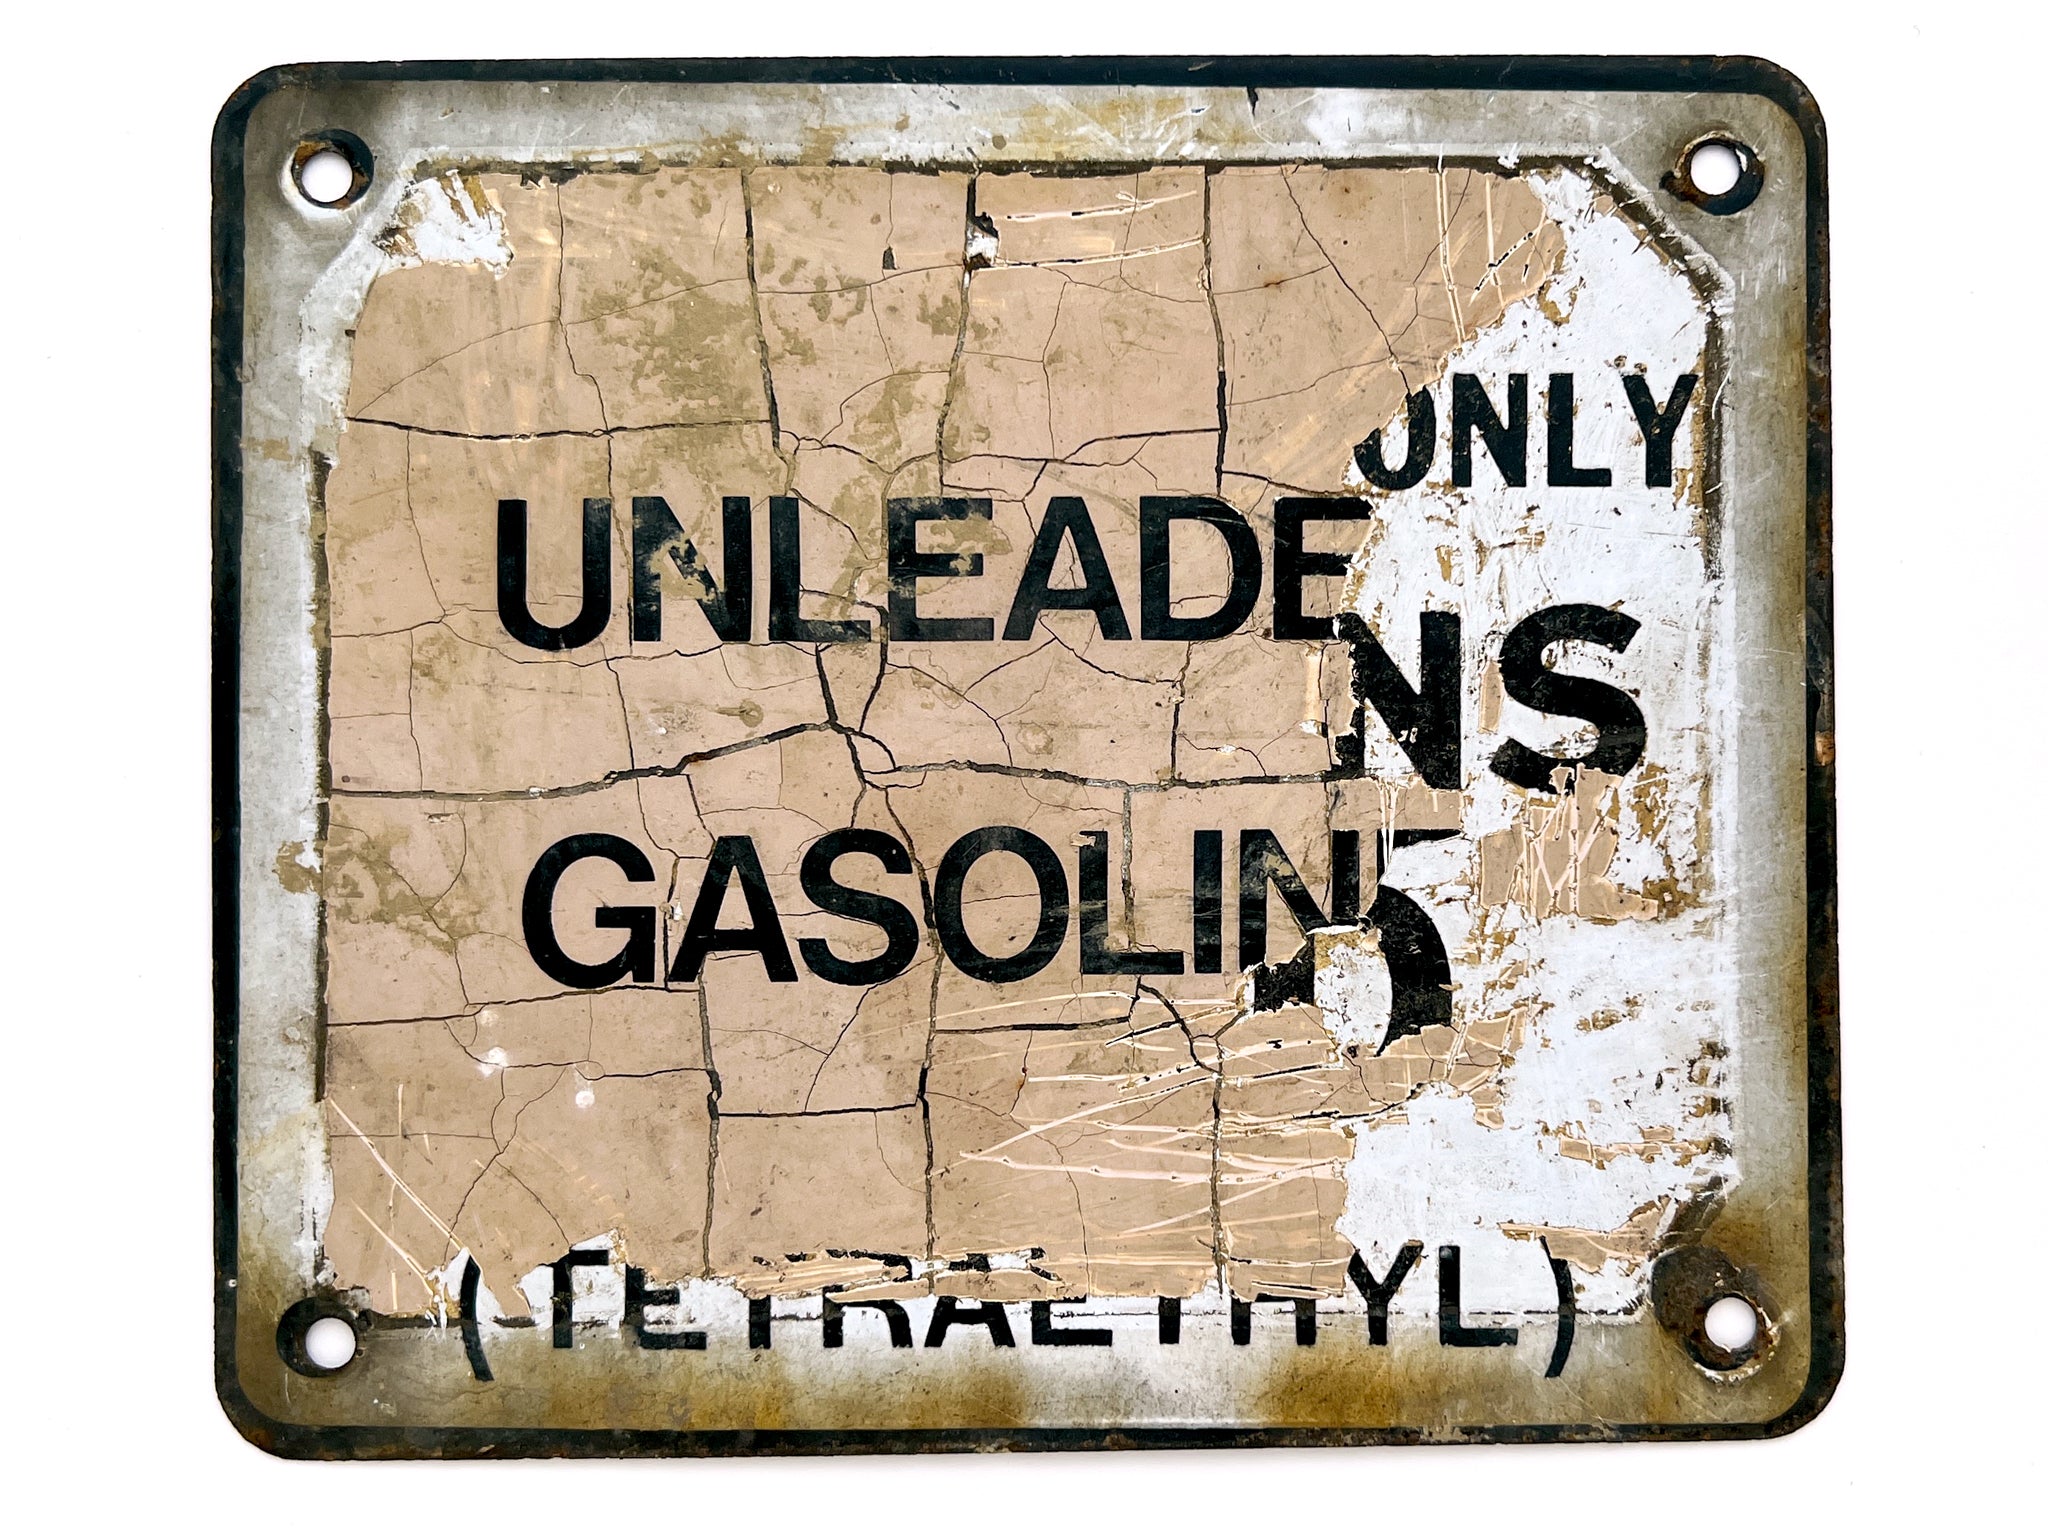 Altered "Contains Led" gas station sign, ca. 1970s